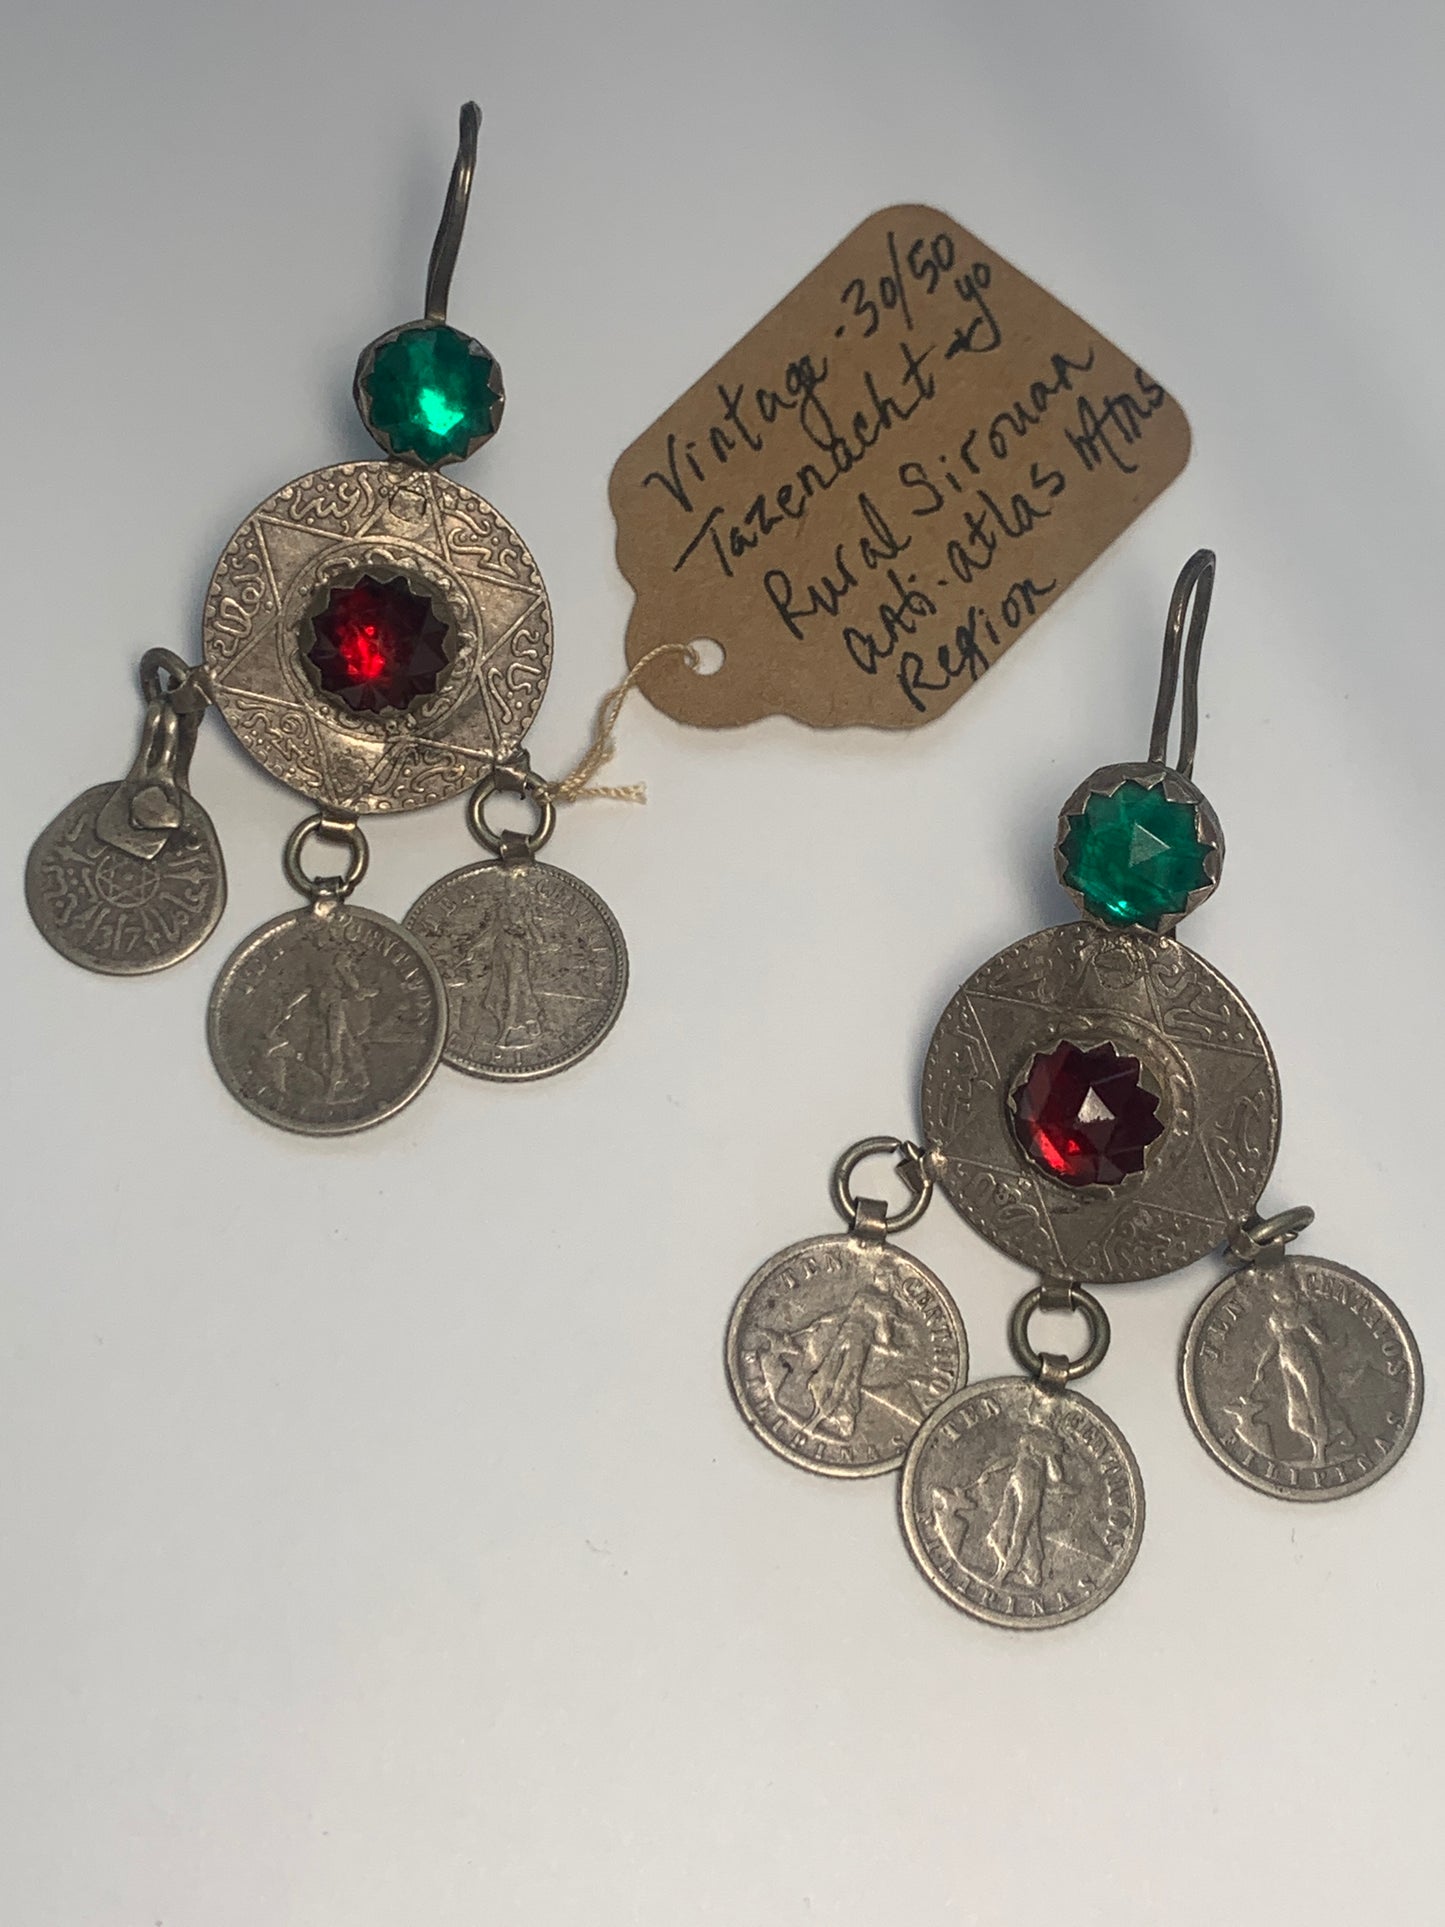 Vintage Ethnic Moroccan Jingle Coin Earrings from Tazenacht, Morocco - Standard size